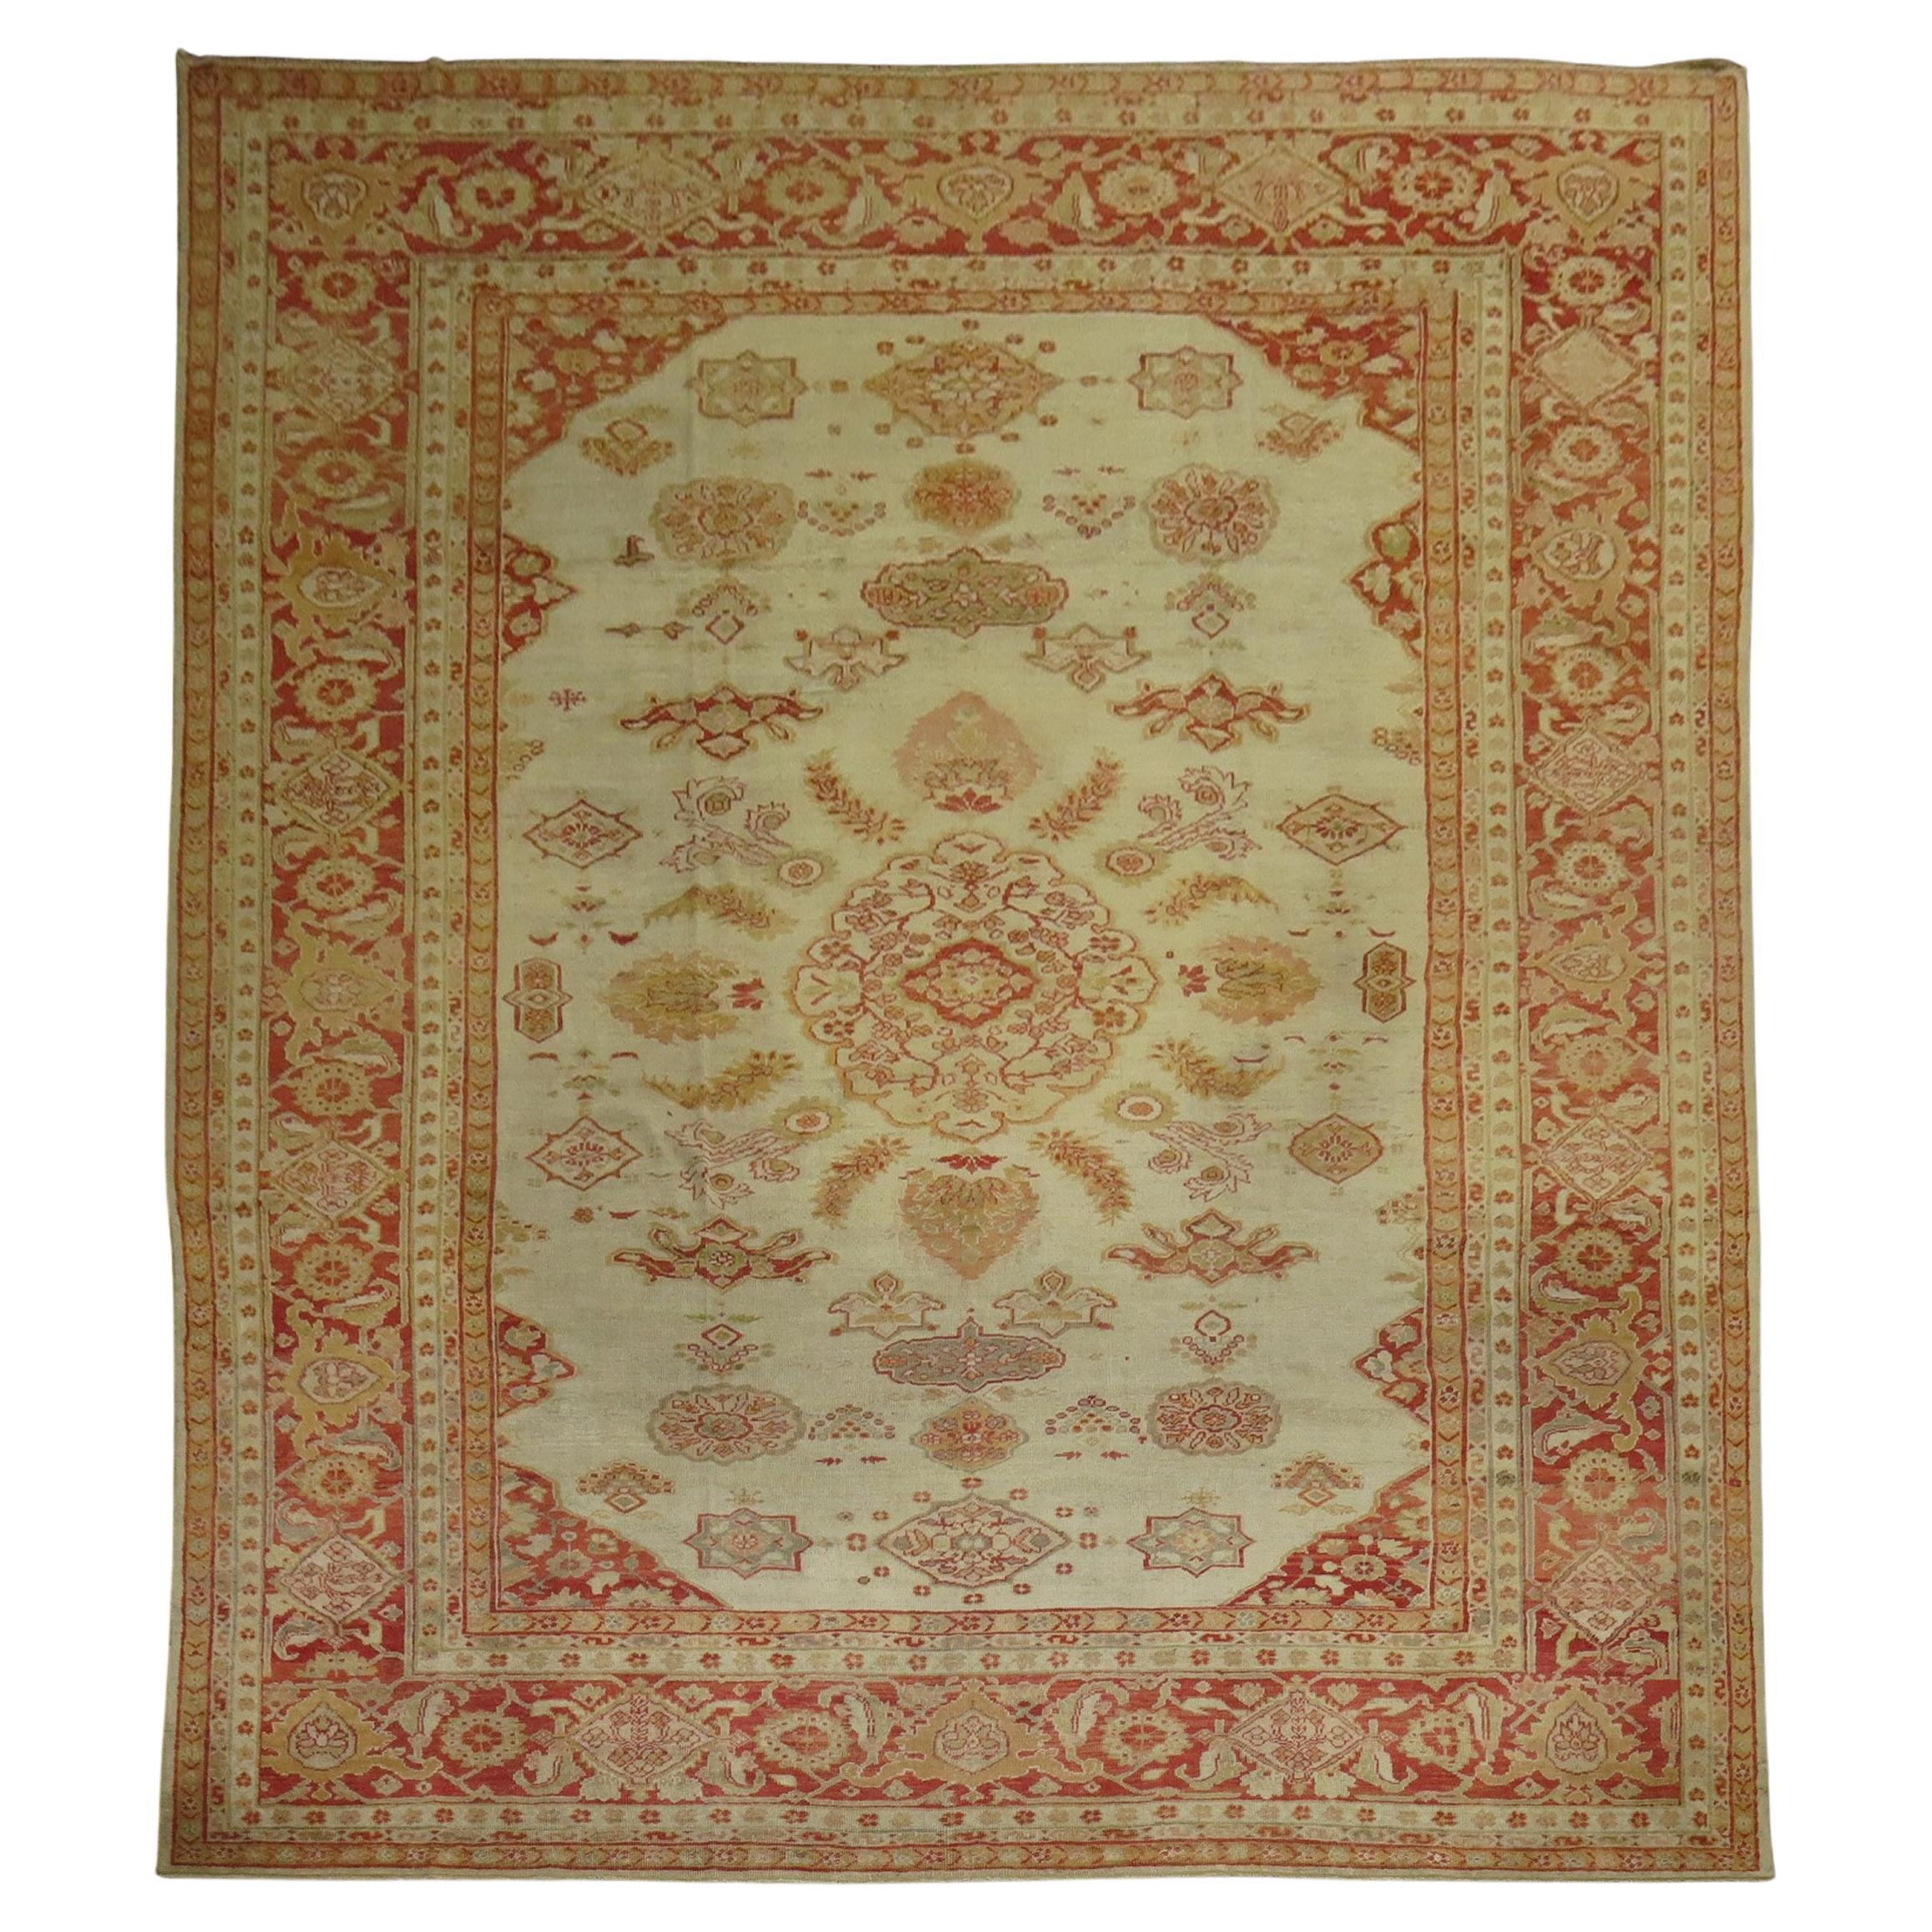 Tapis persan Sultanabad ivoire ancien